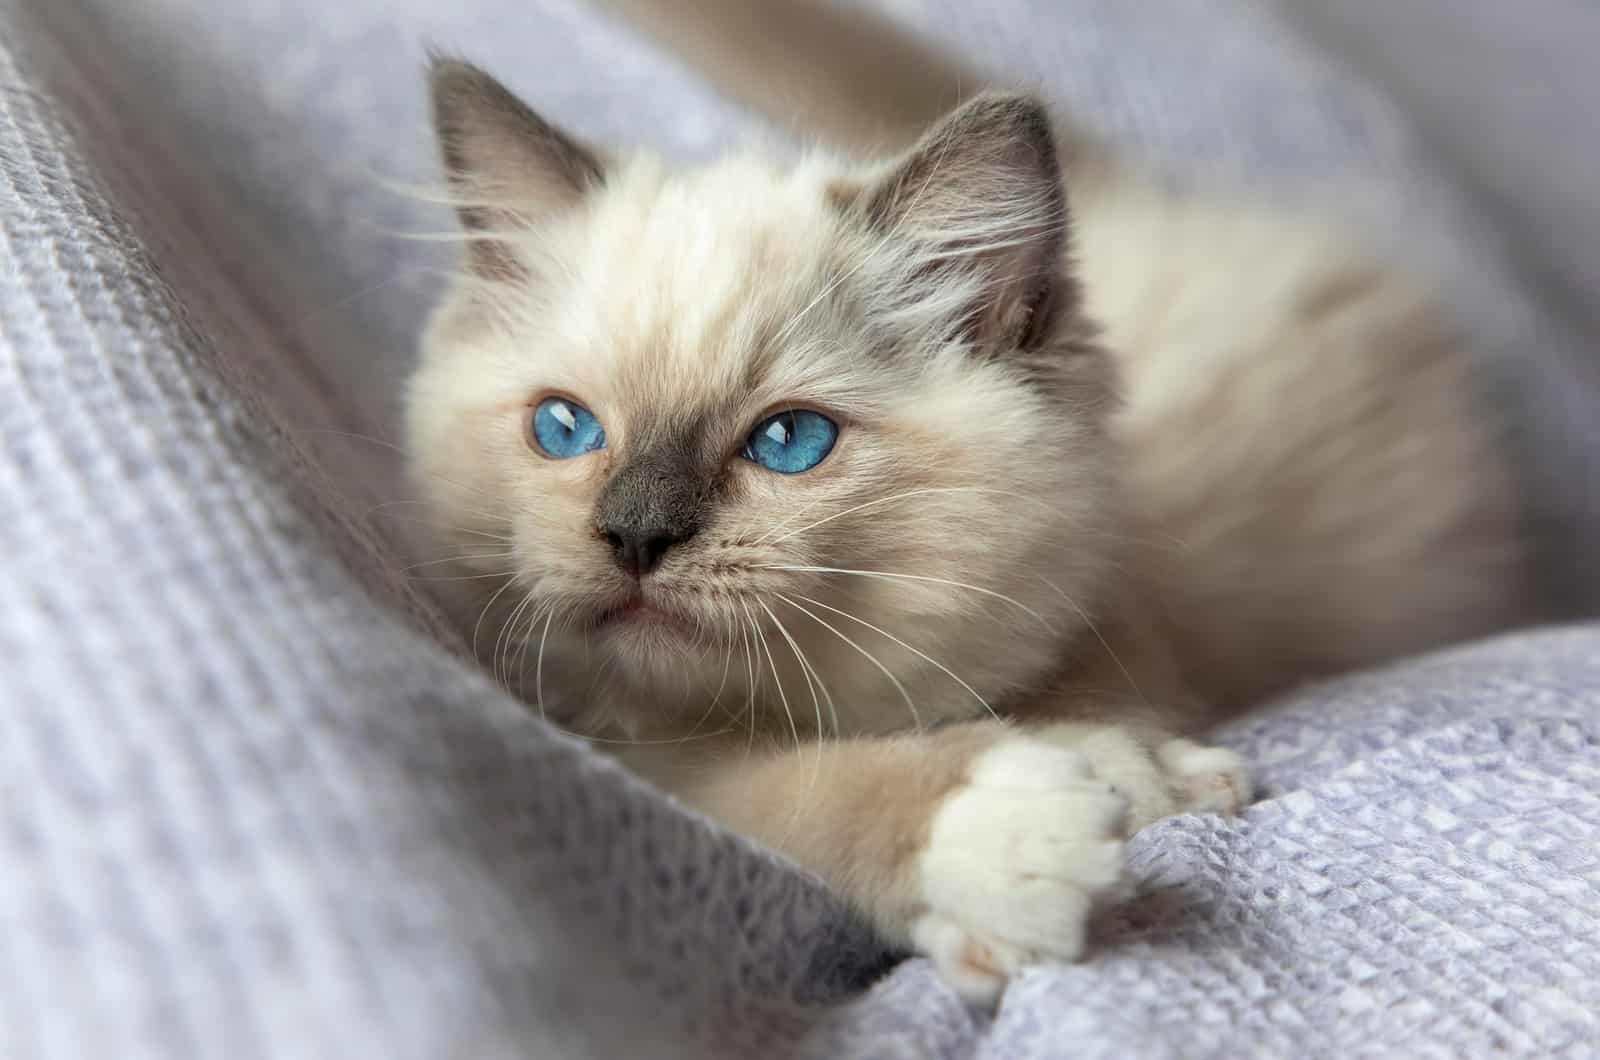 Ragdoll Kitten is lying down and resting